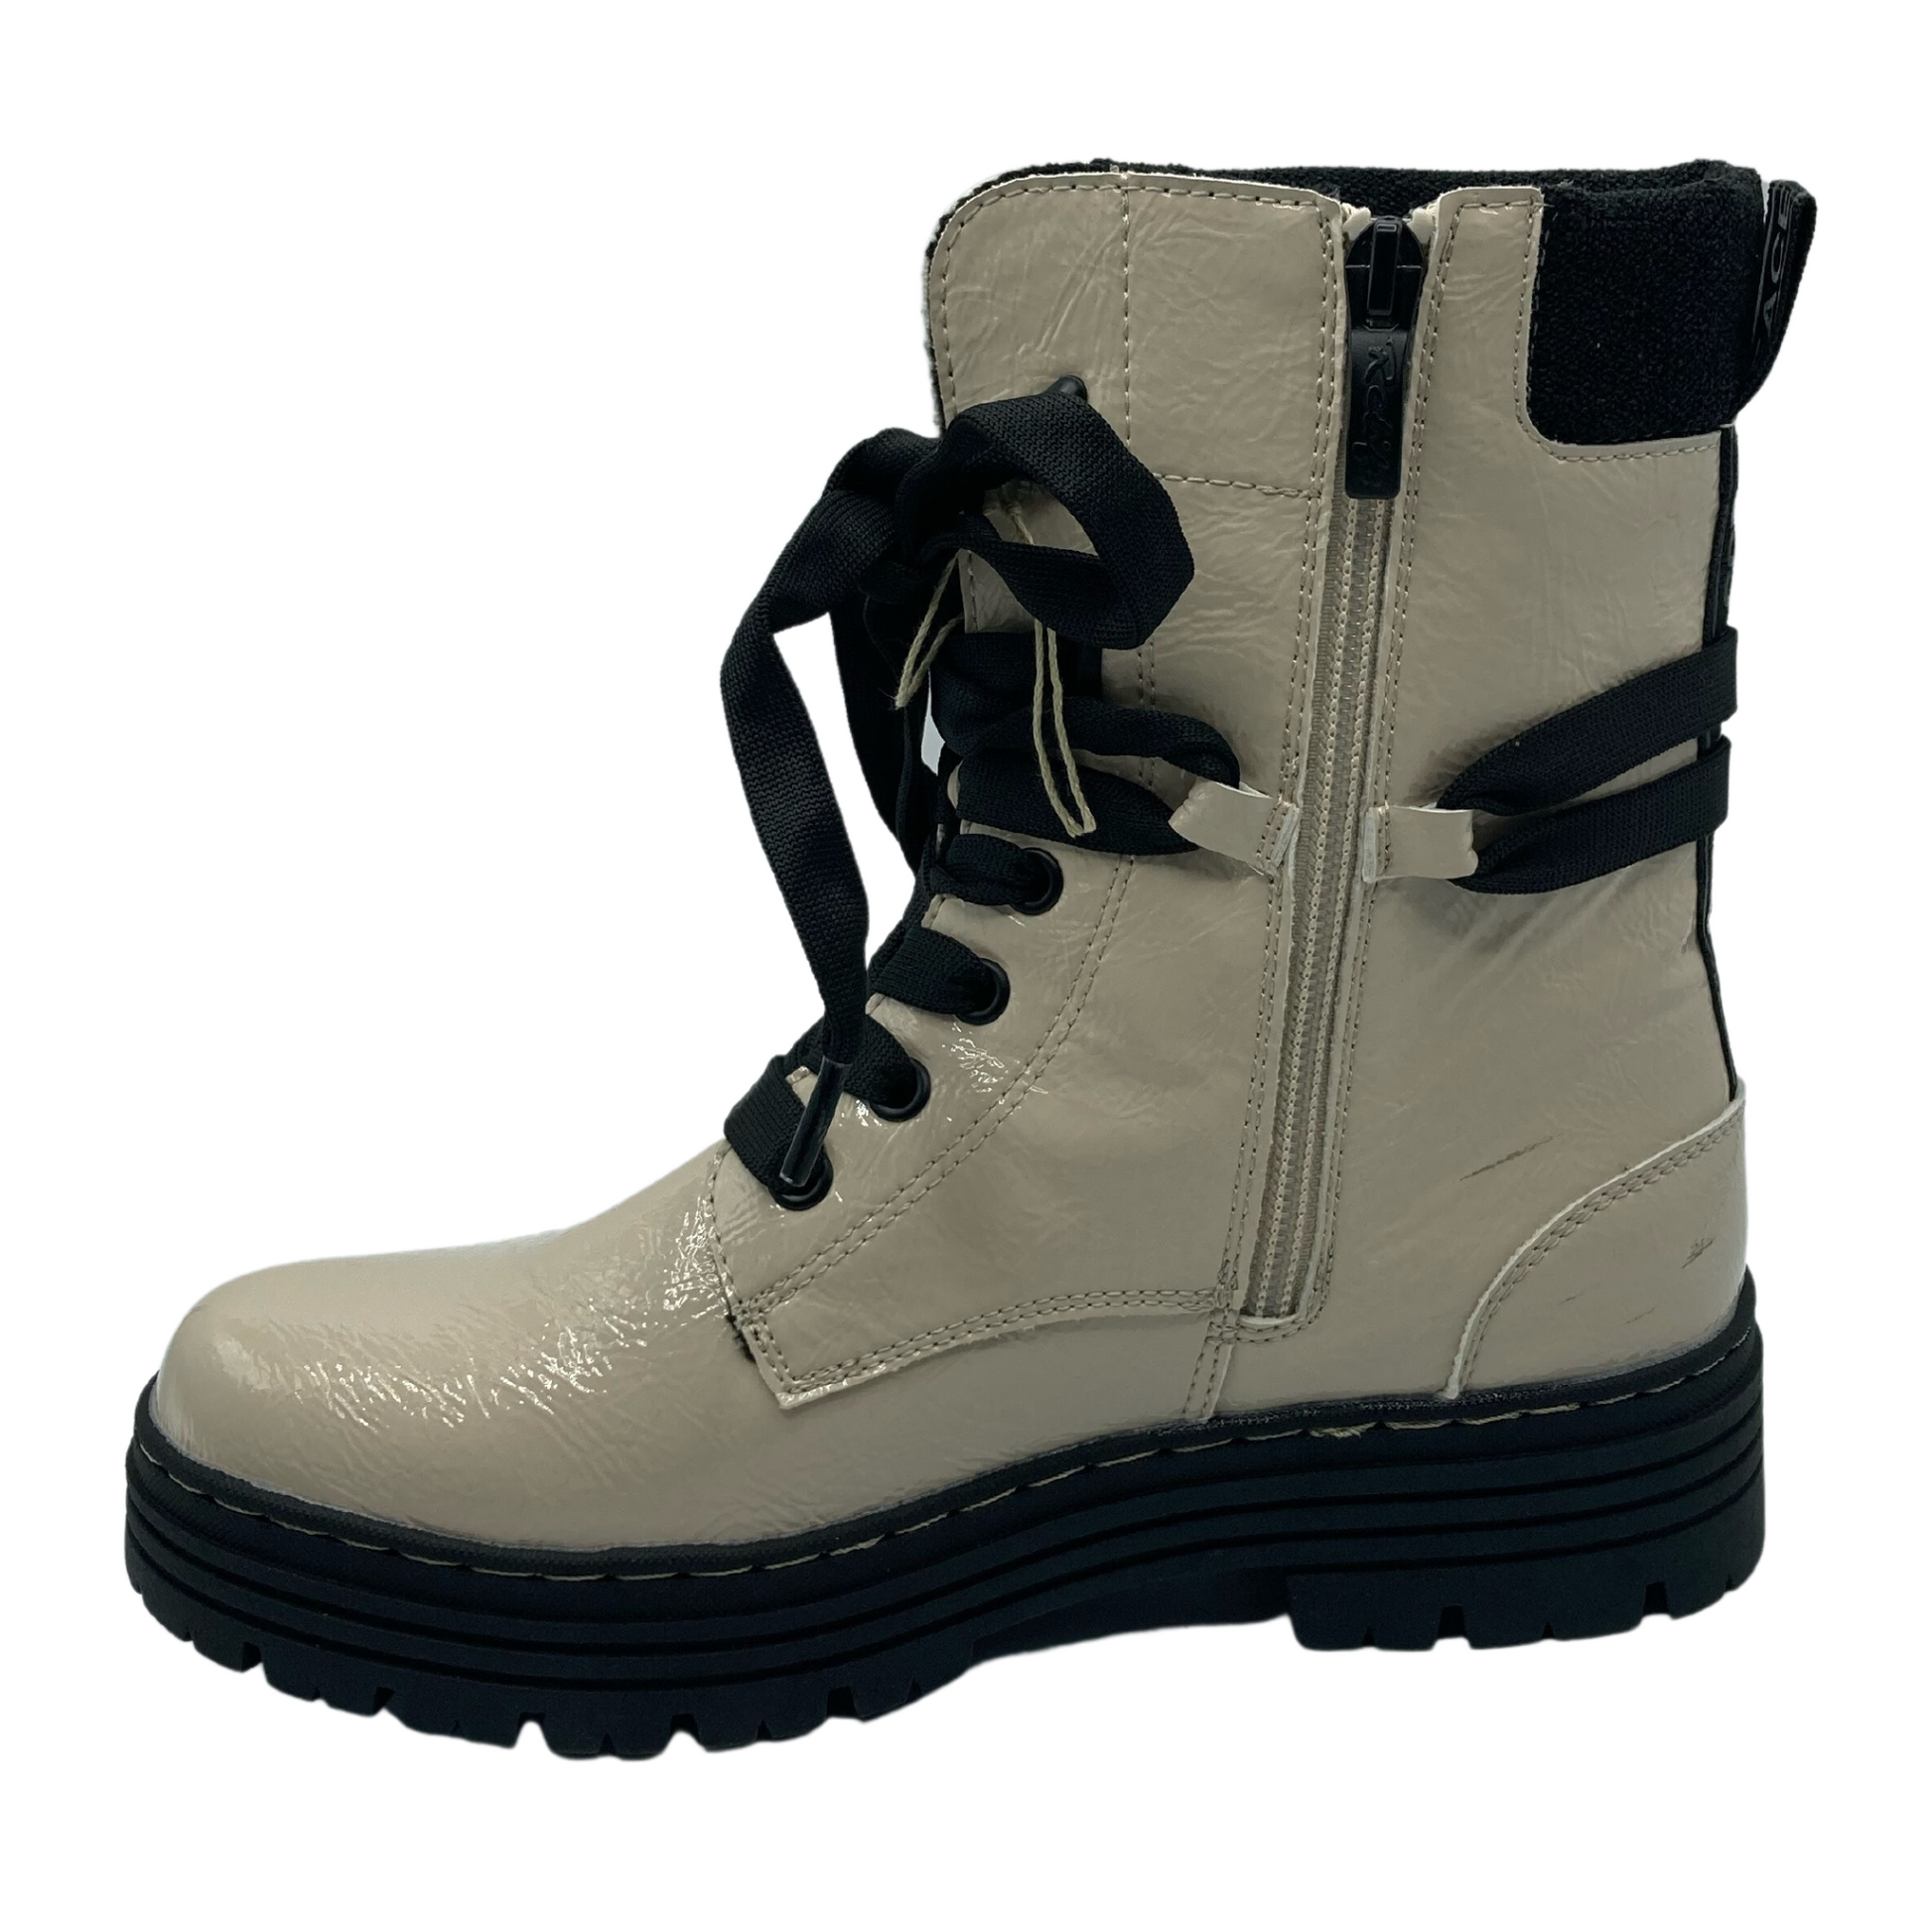 Left facing view of beige patent textile boot with side lace closure and black rubber outsole